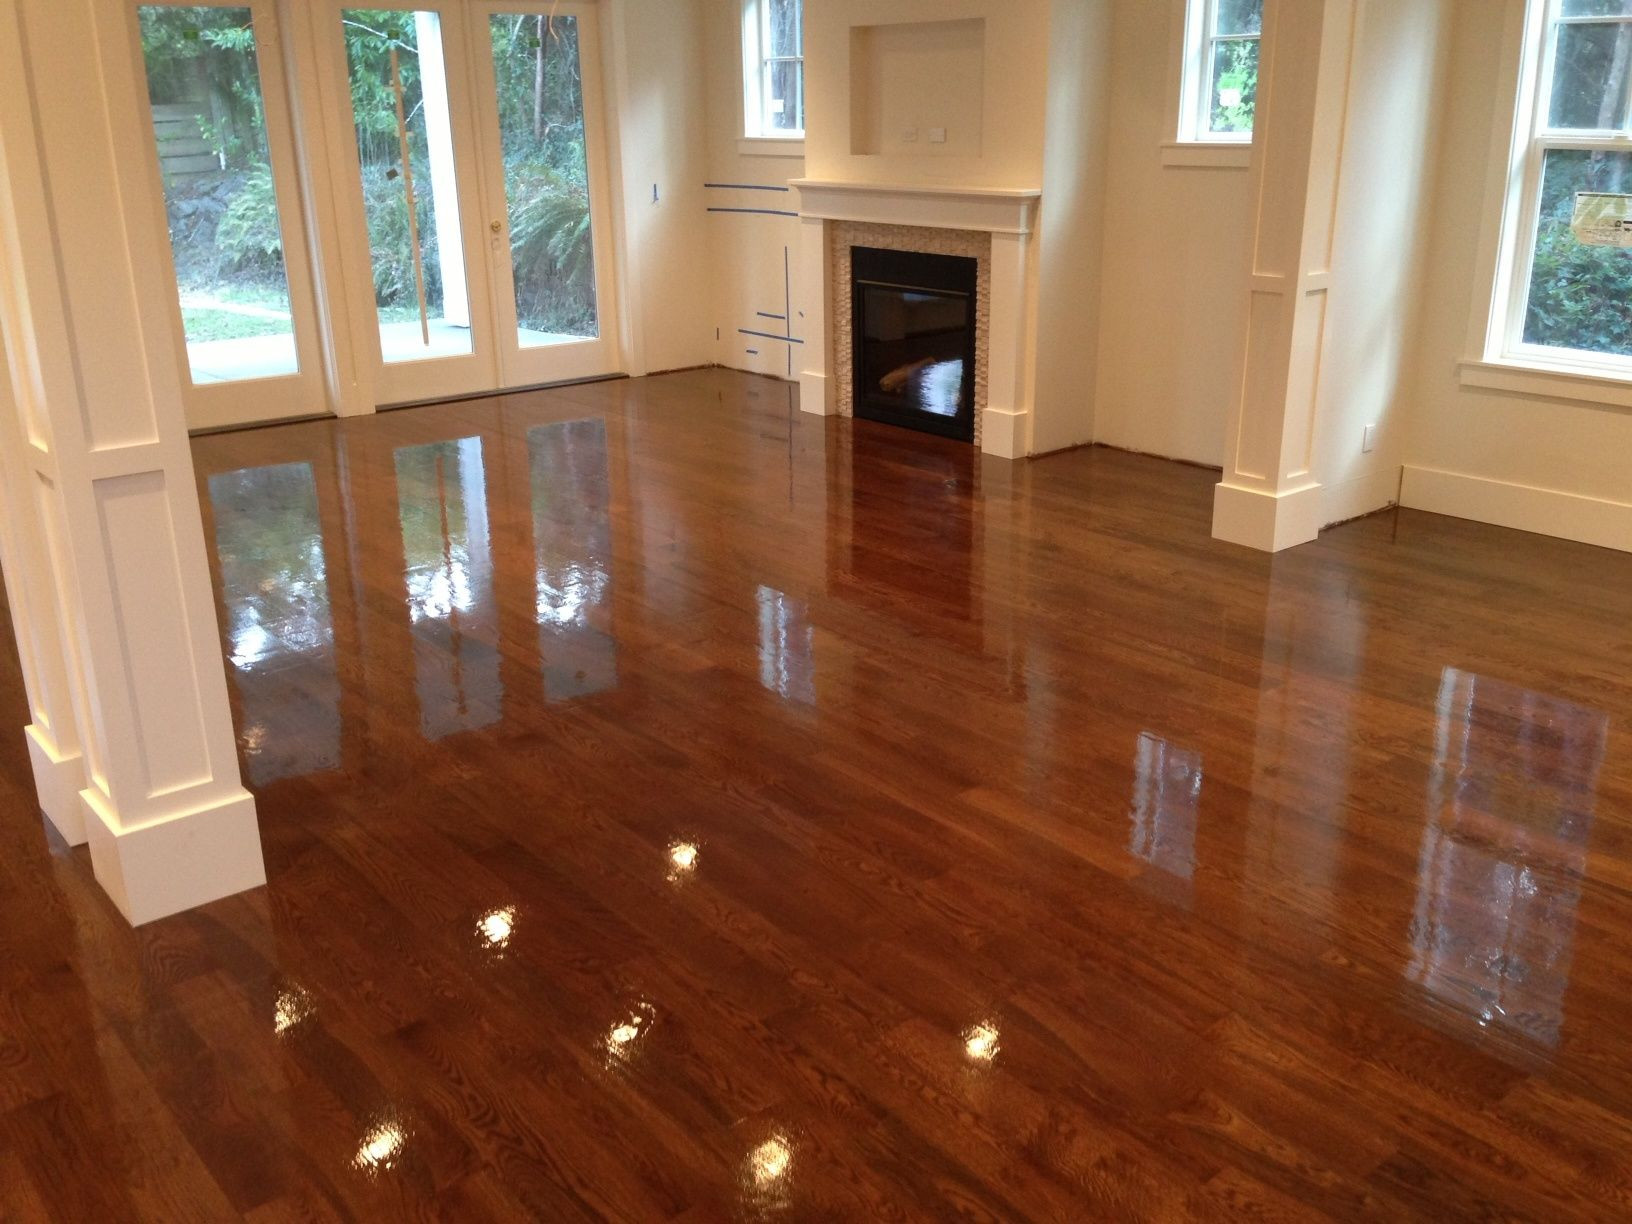 22 Awesome Hardwood Floor Restoration before and after 2024 free download hardwood floor restoration before and after of express flooring has outlets in glendale tucson and all neighboring intended for hardwood floors seattle hardwood floor refinishing and install